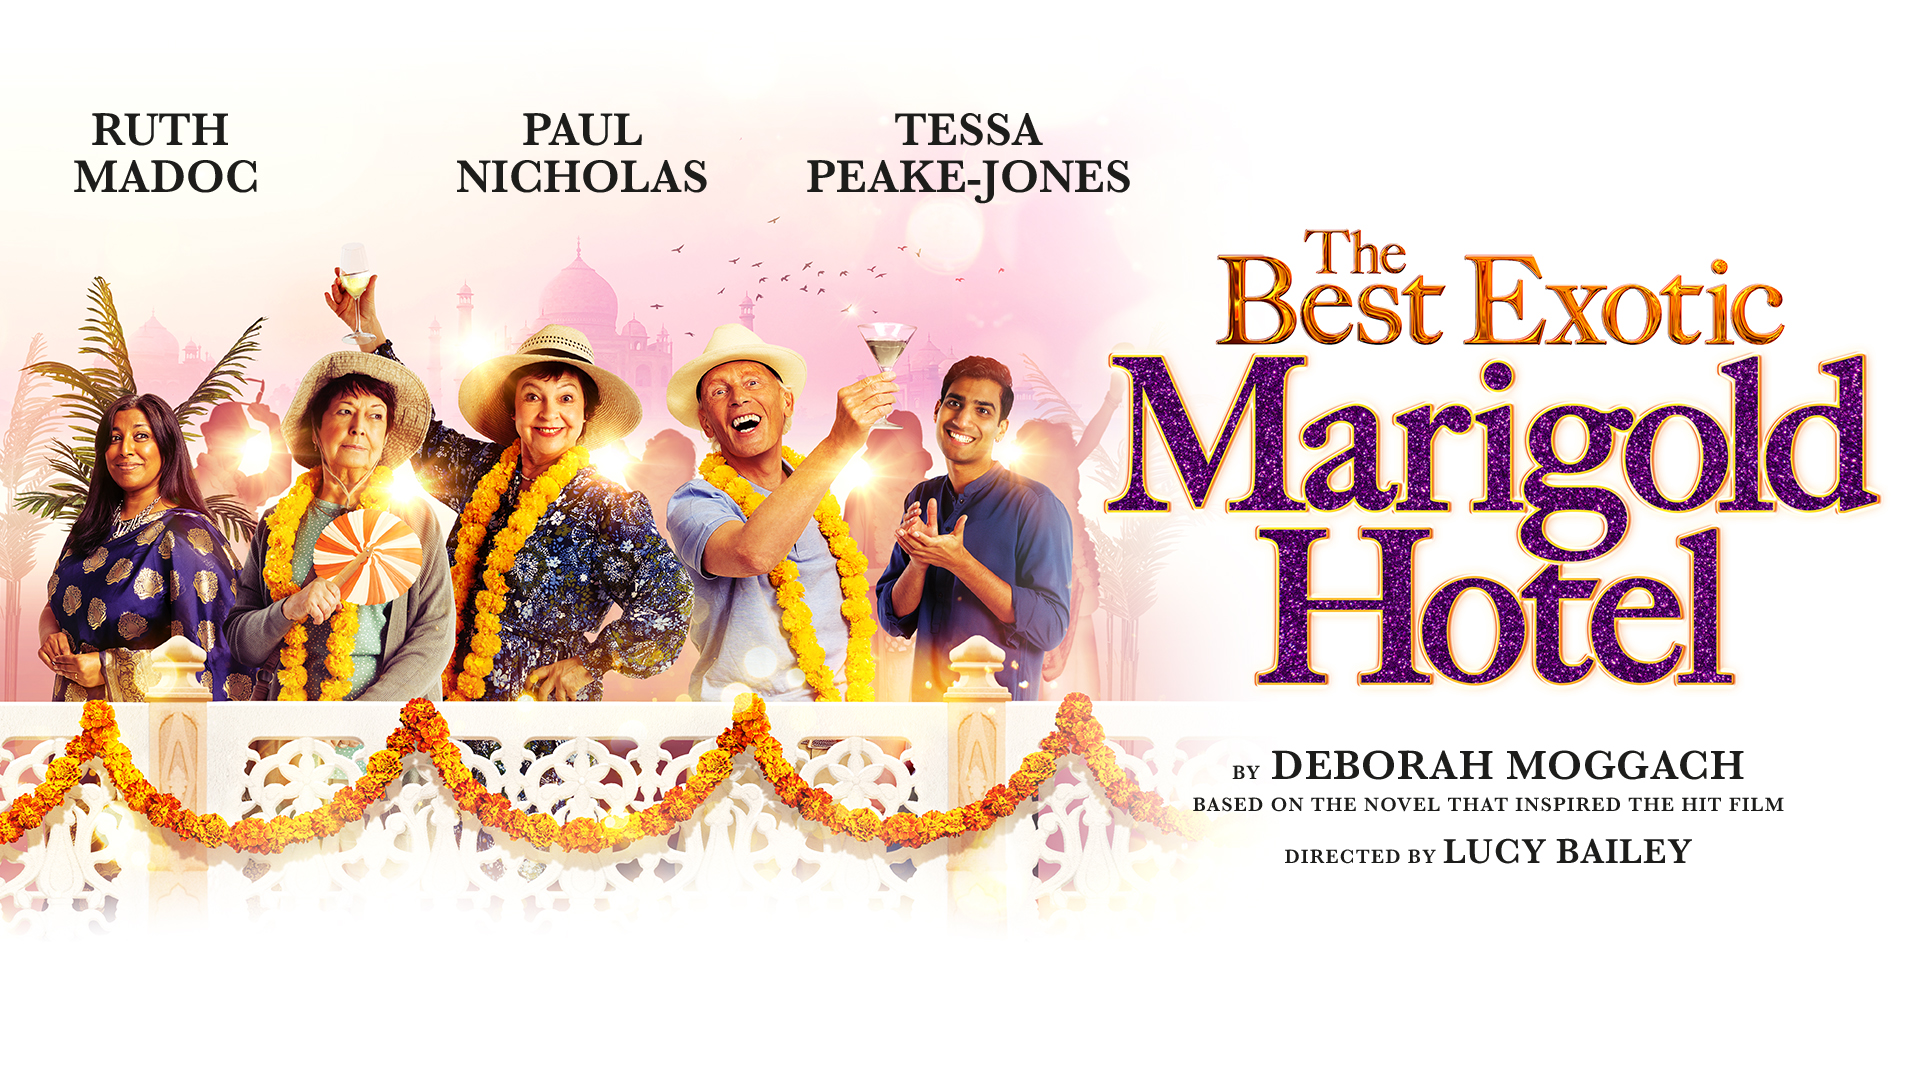 The Best Exotic Marigold Hotel advertising poster